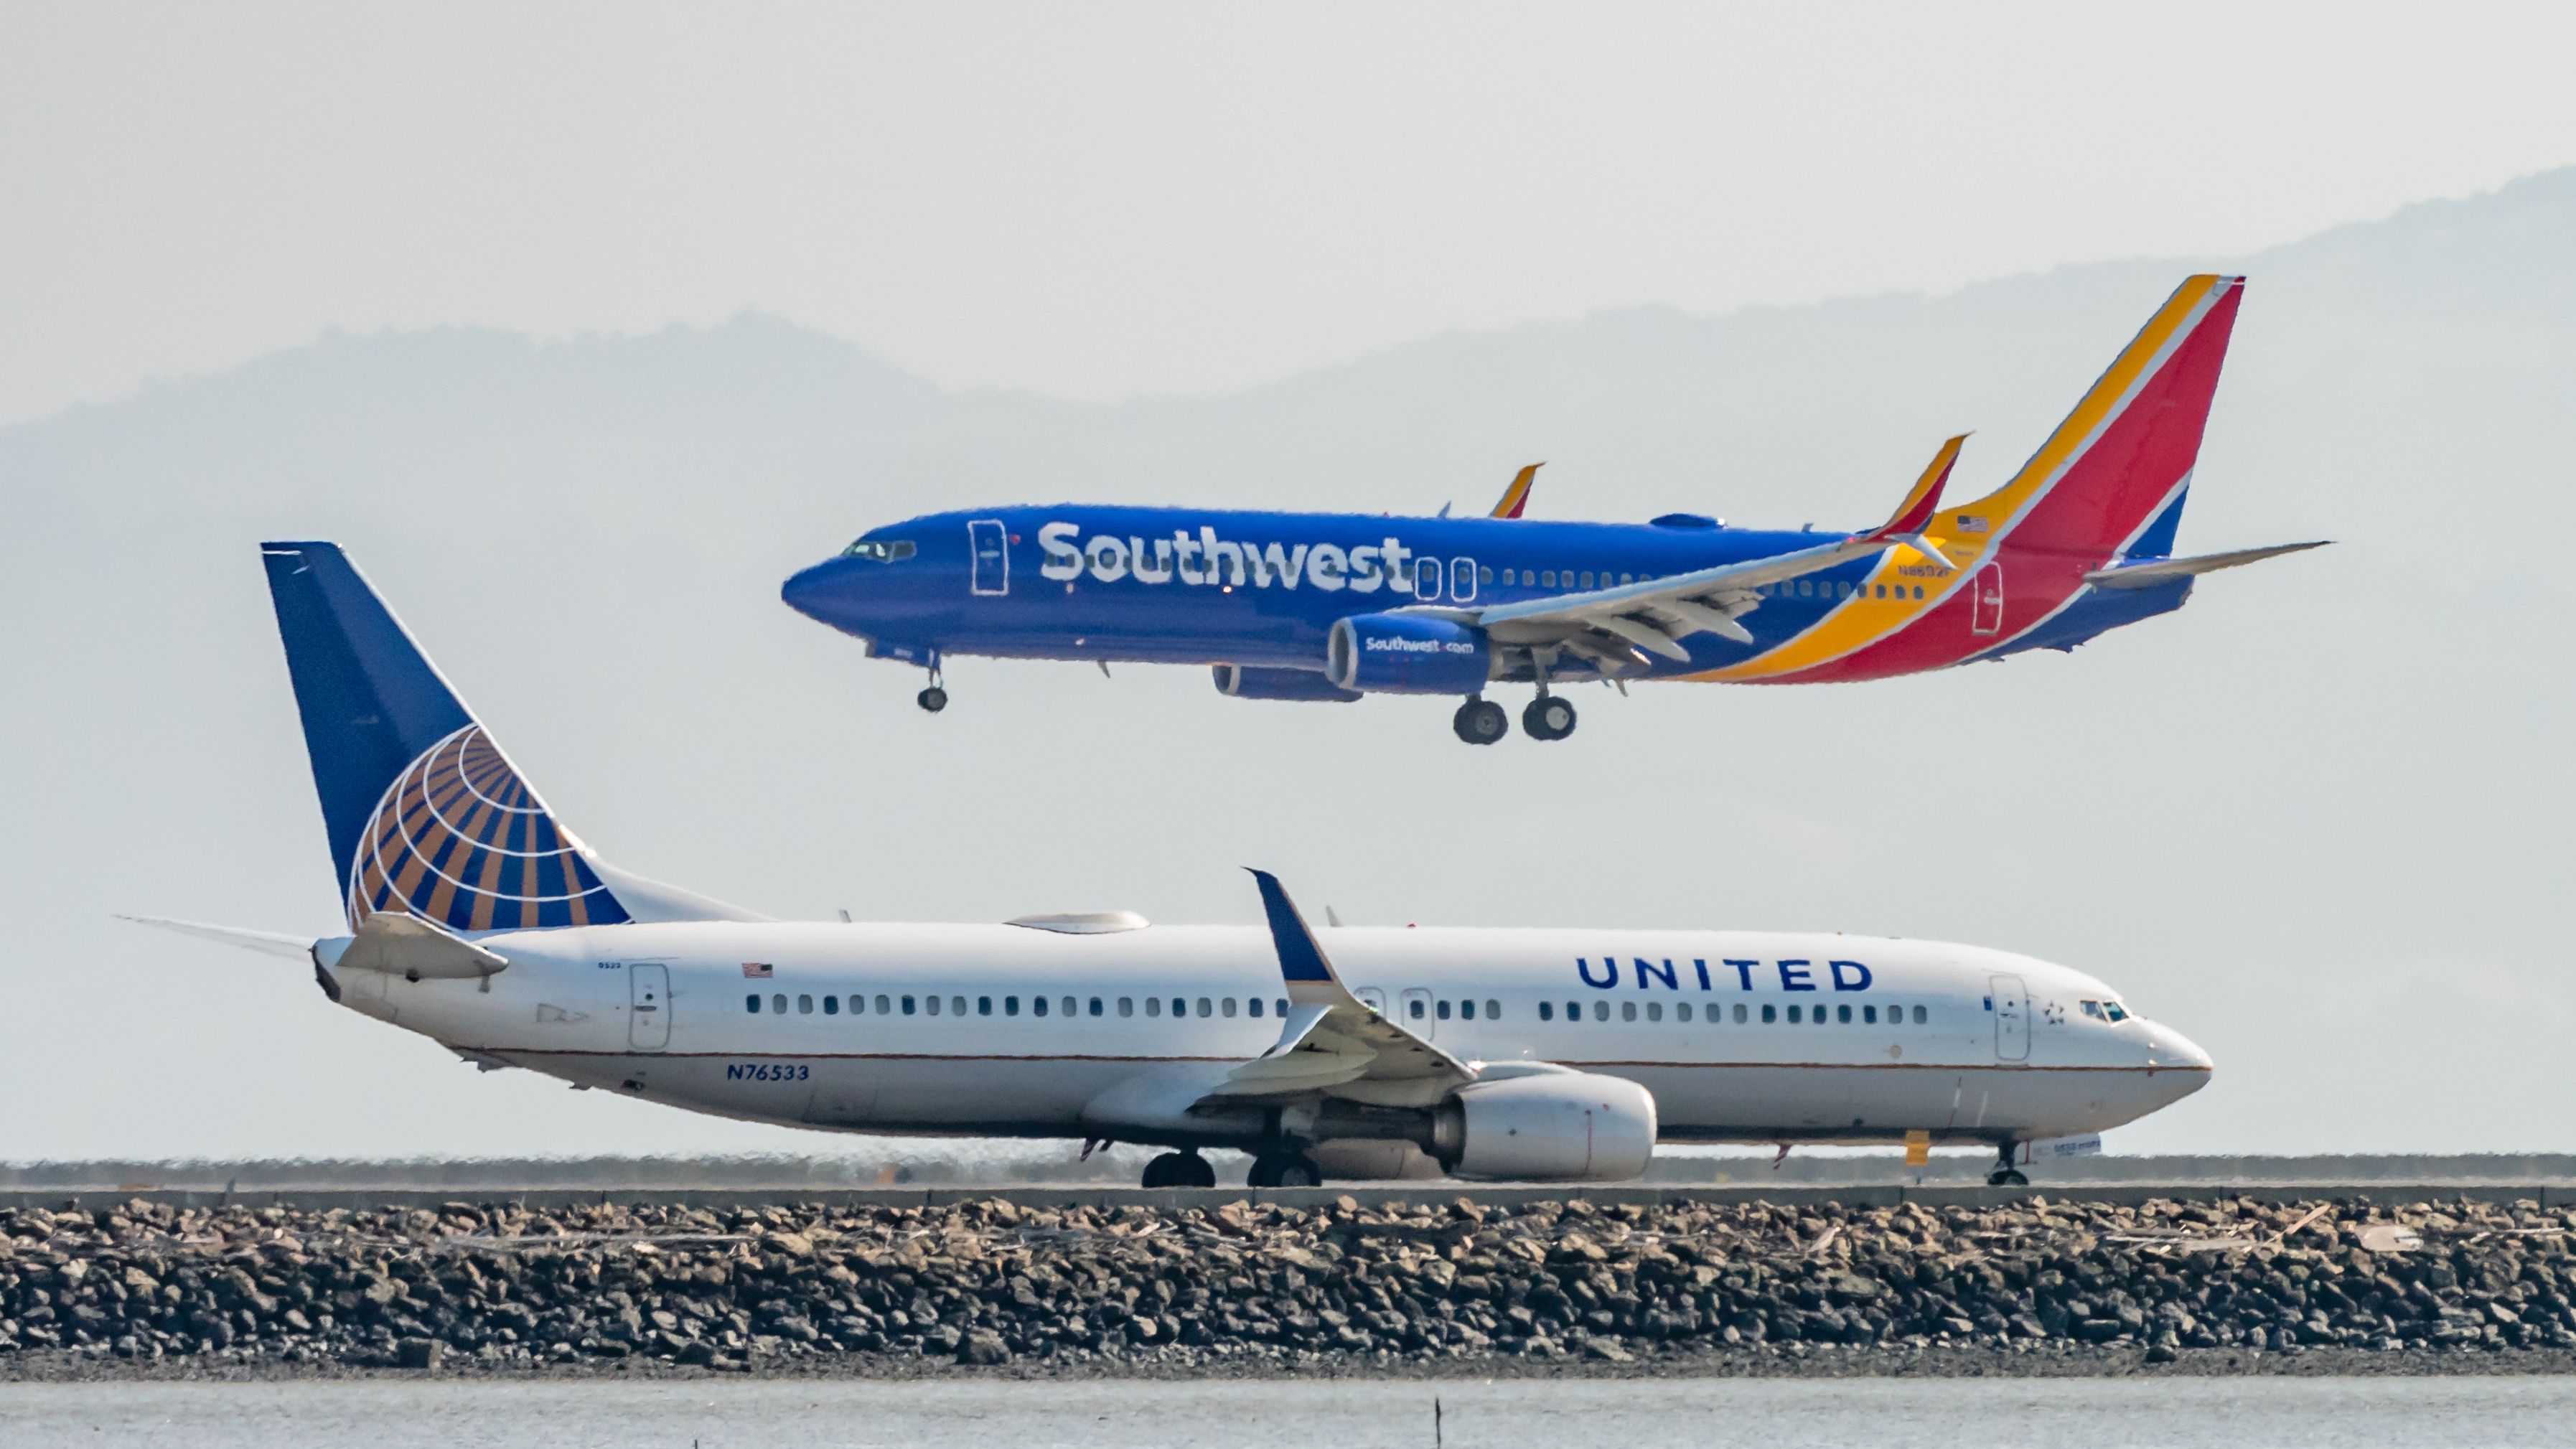 United Airlines and Southwest Airlines Boeing 737-800s.